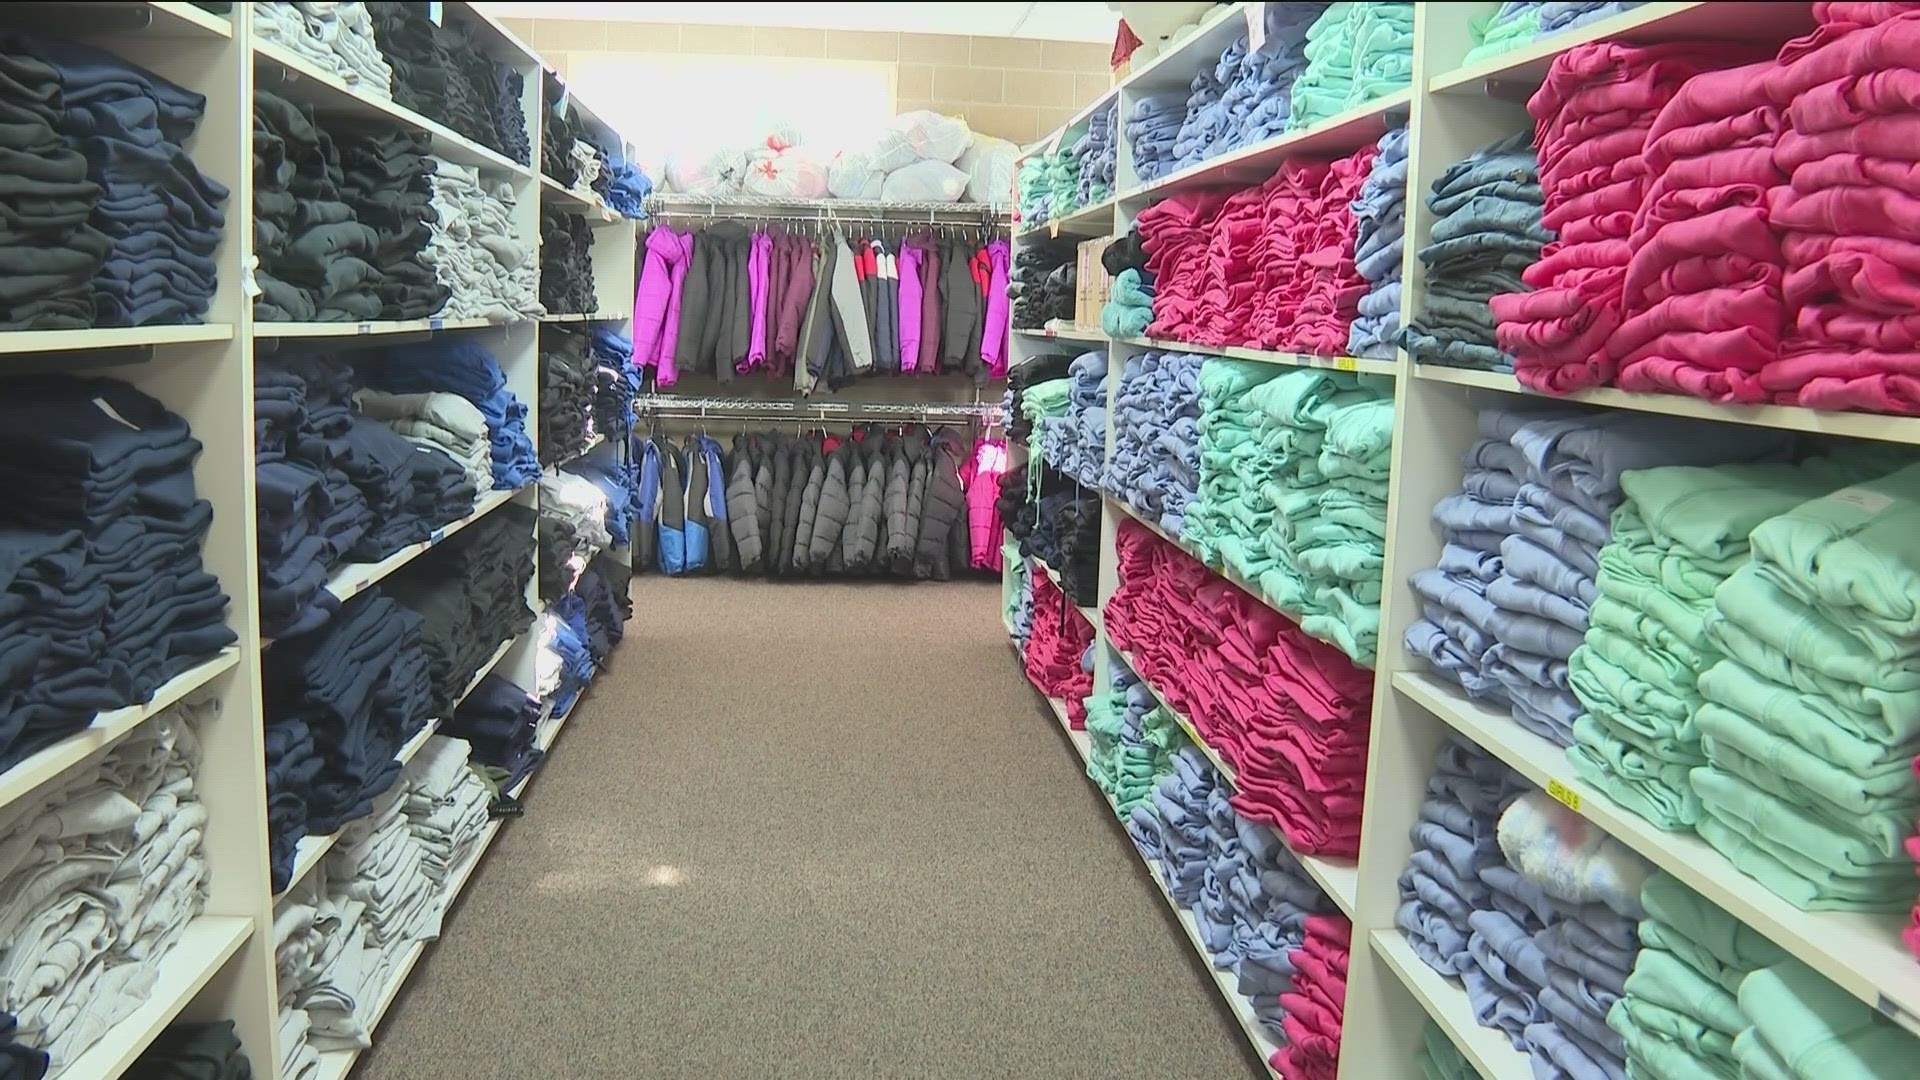 The program helps about 3,400 children each year and has been collaborating with Ada County school districts to provide students with brand new clothing since 1990.